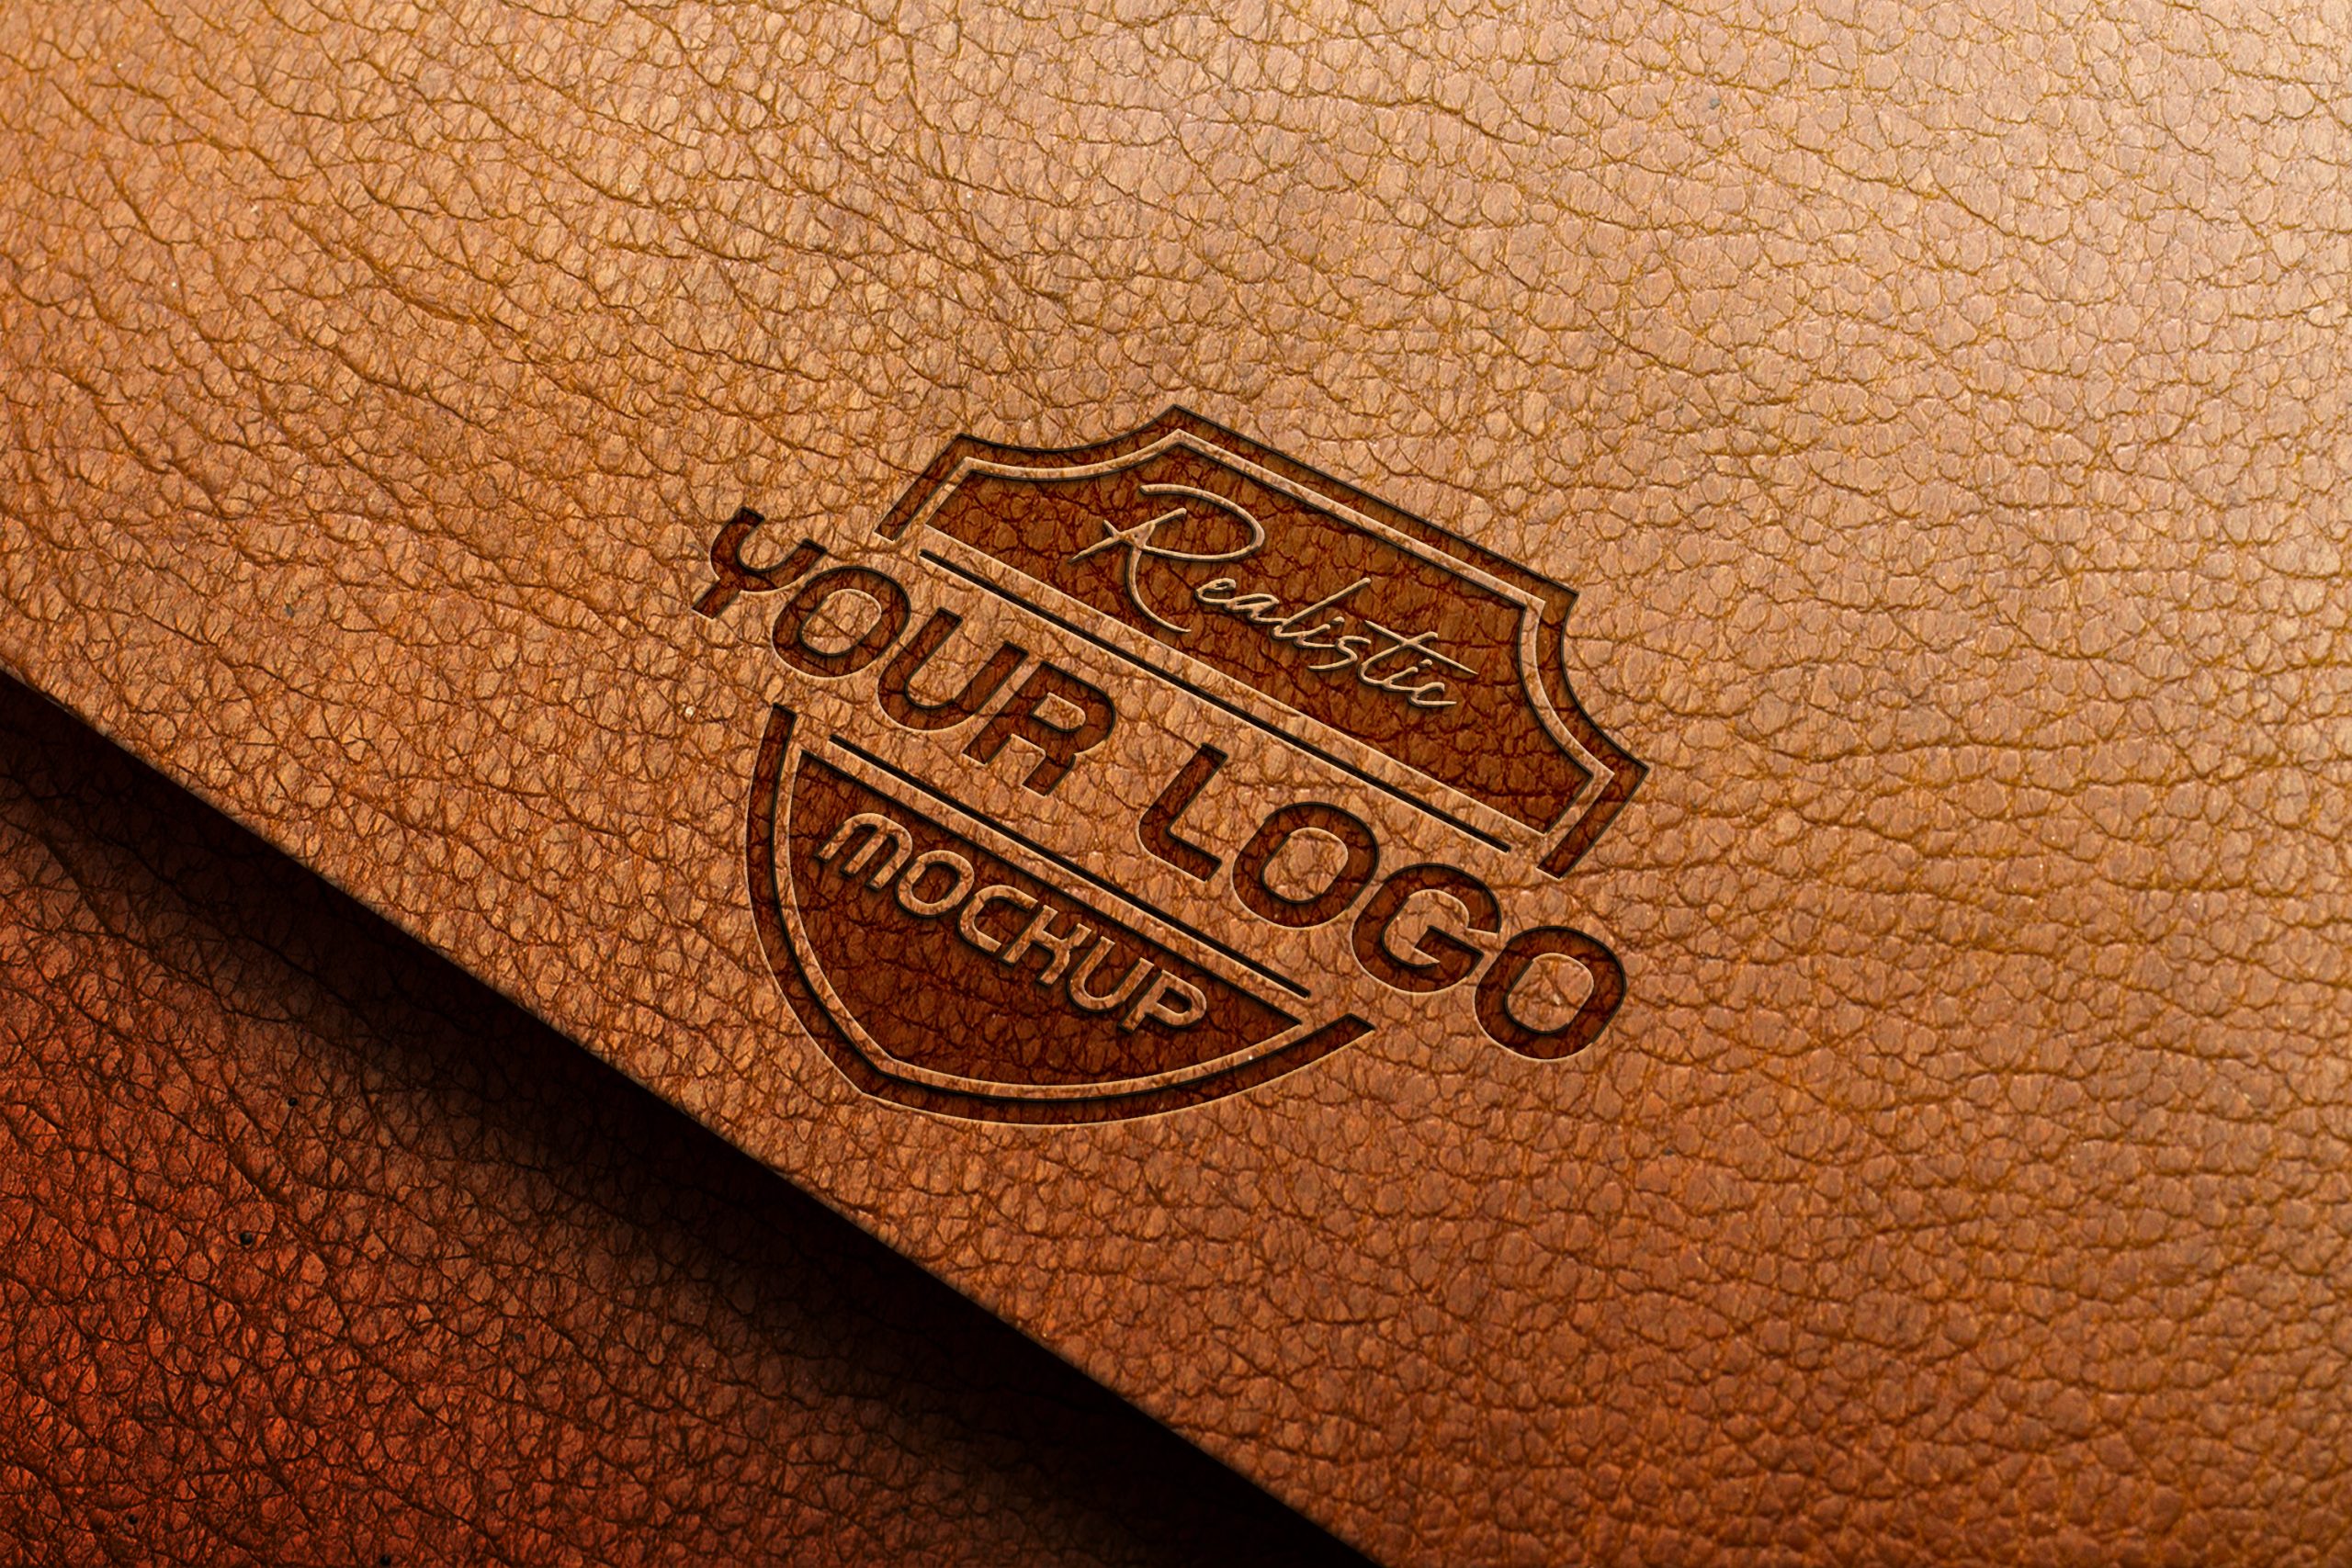 Leather Book Mockup - Free Vectors & PSDs to Download